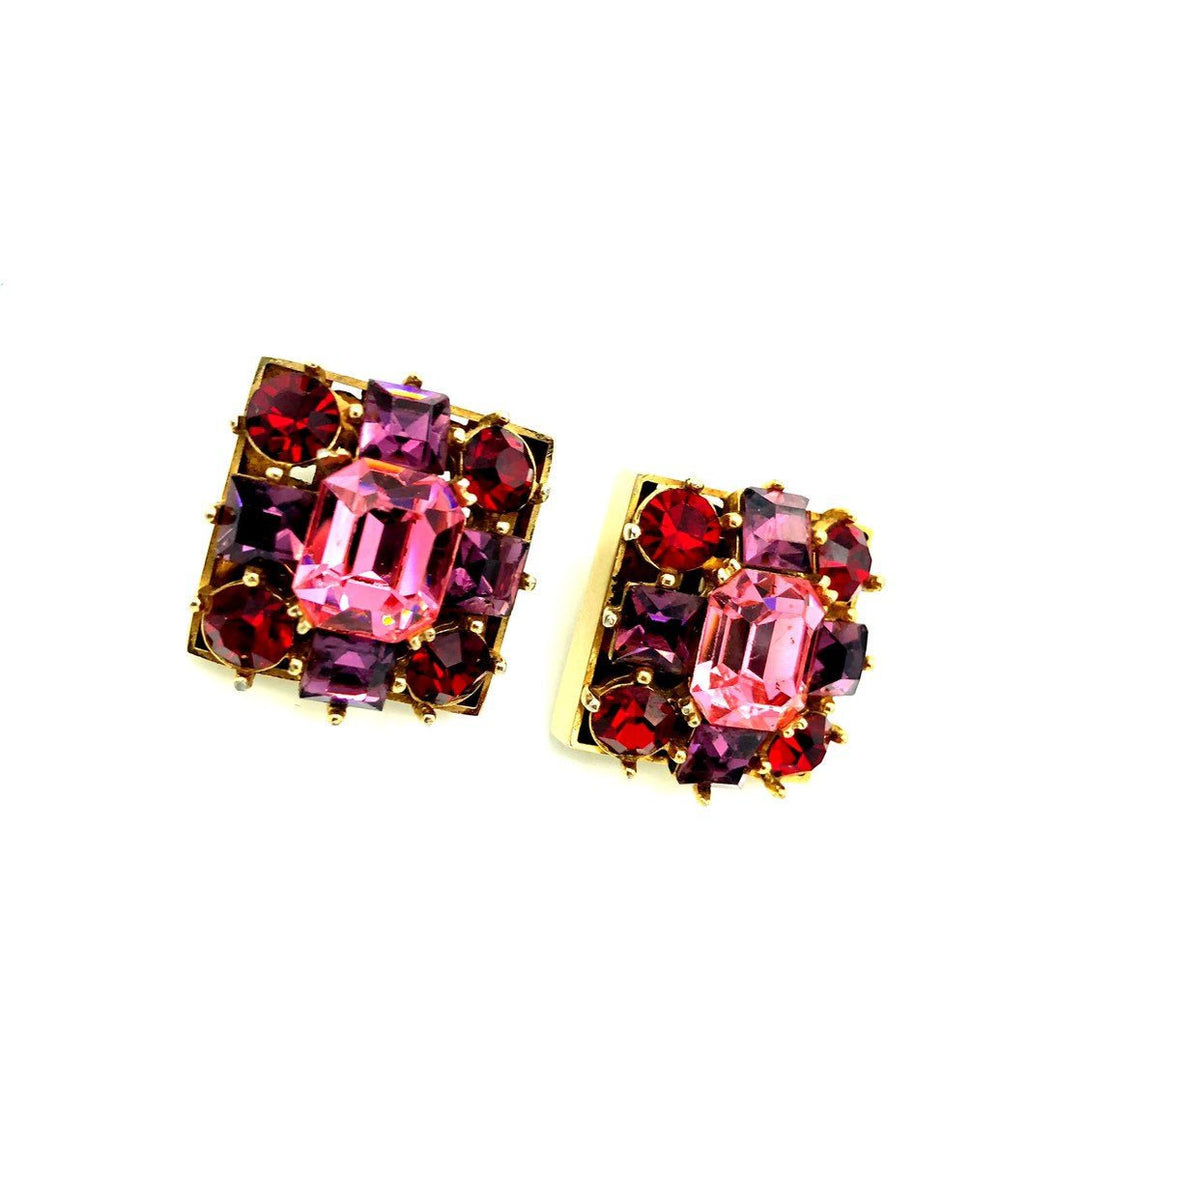 Vintage Pink & Red Rhinestone Square Clip-On Earrings - 24 Wishes Vintage Jewelry